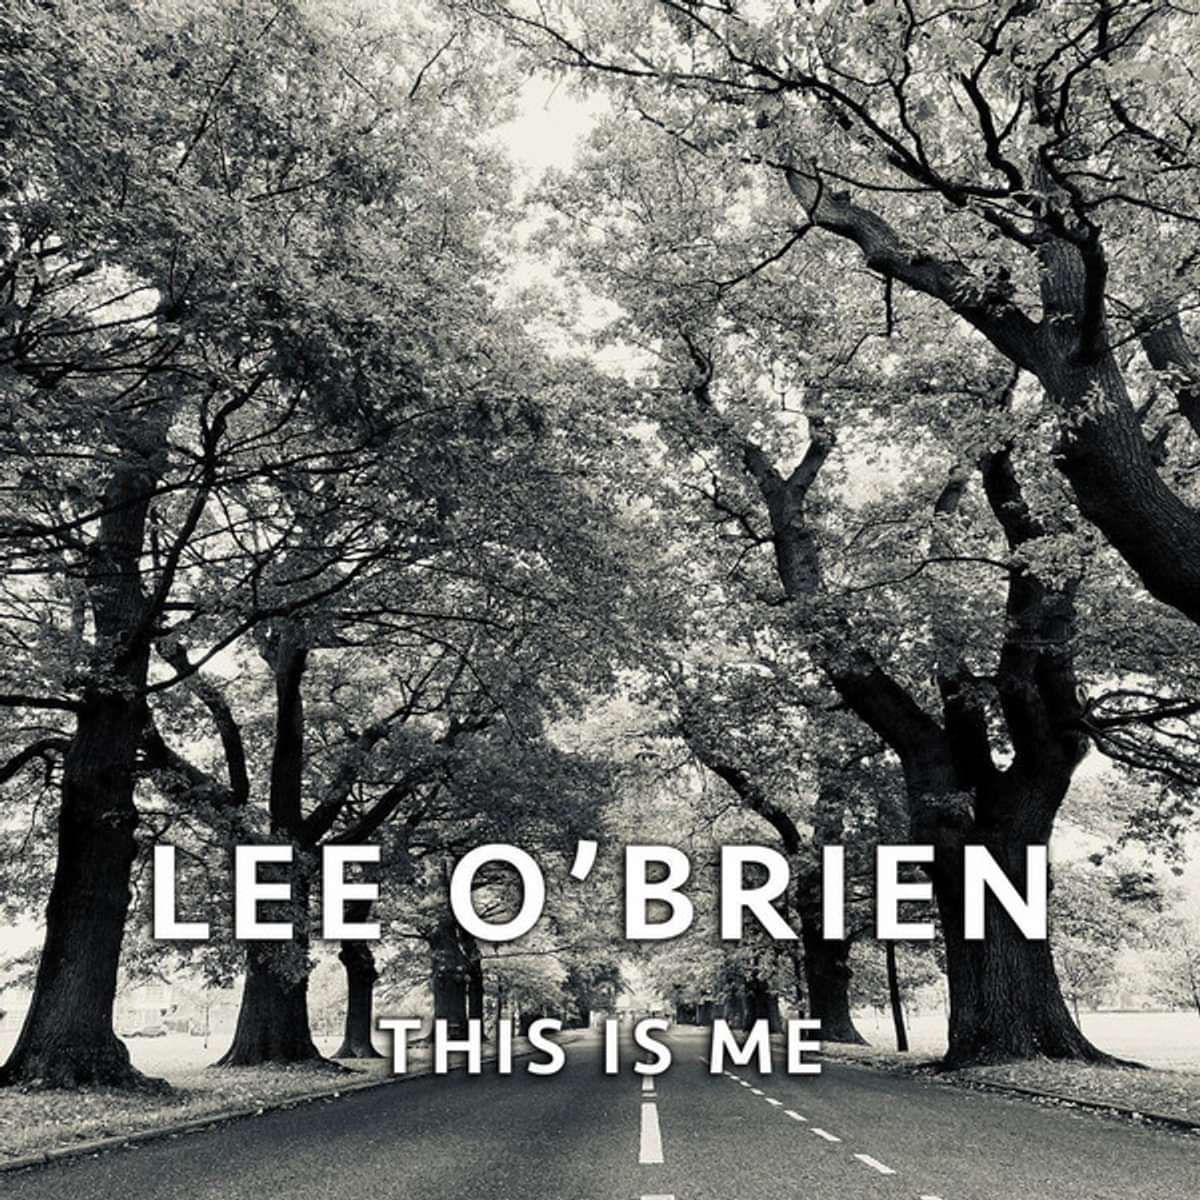 Lee O'Brien - This Is Me - CD [Recorded with Status Quo's Francis Rossi] PRE-ORDER - Barrel And Squidger Records